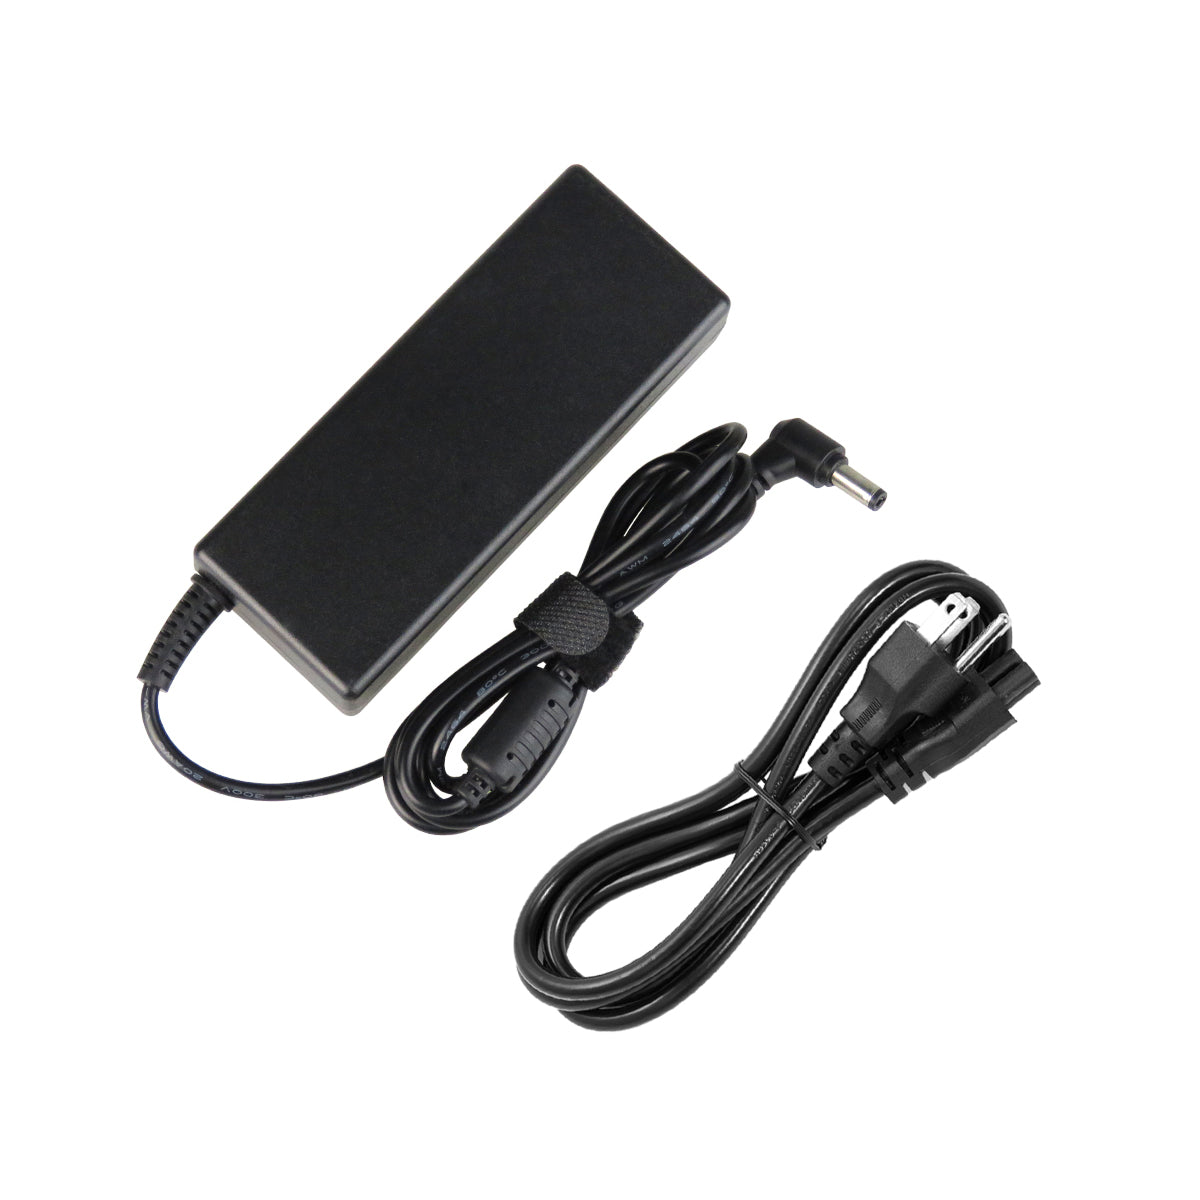 AC Adapter Charger for ASUS U58C Notebook.